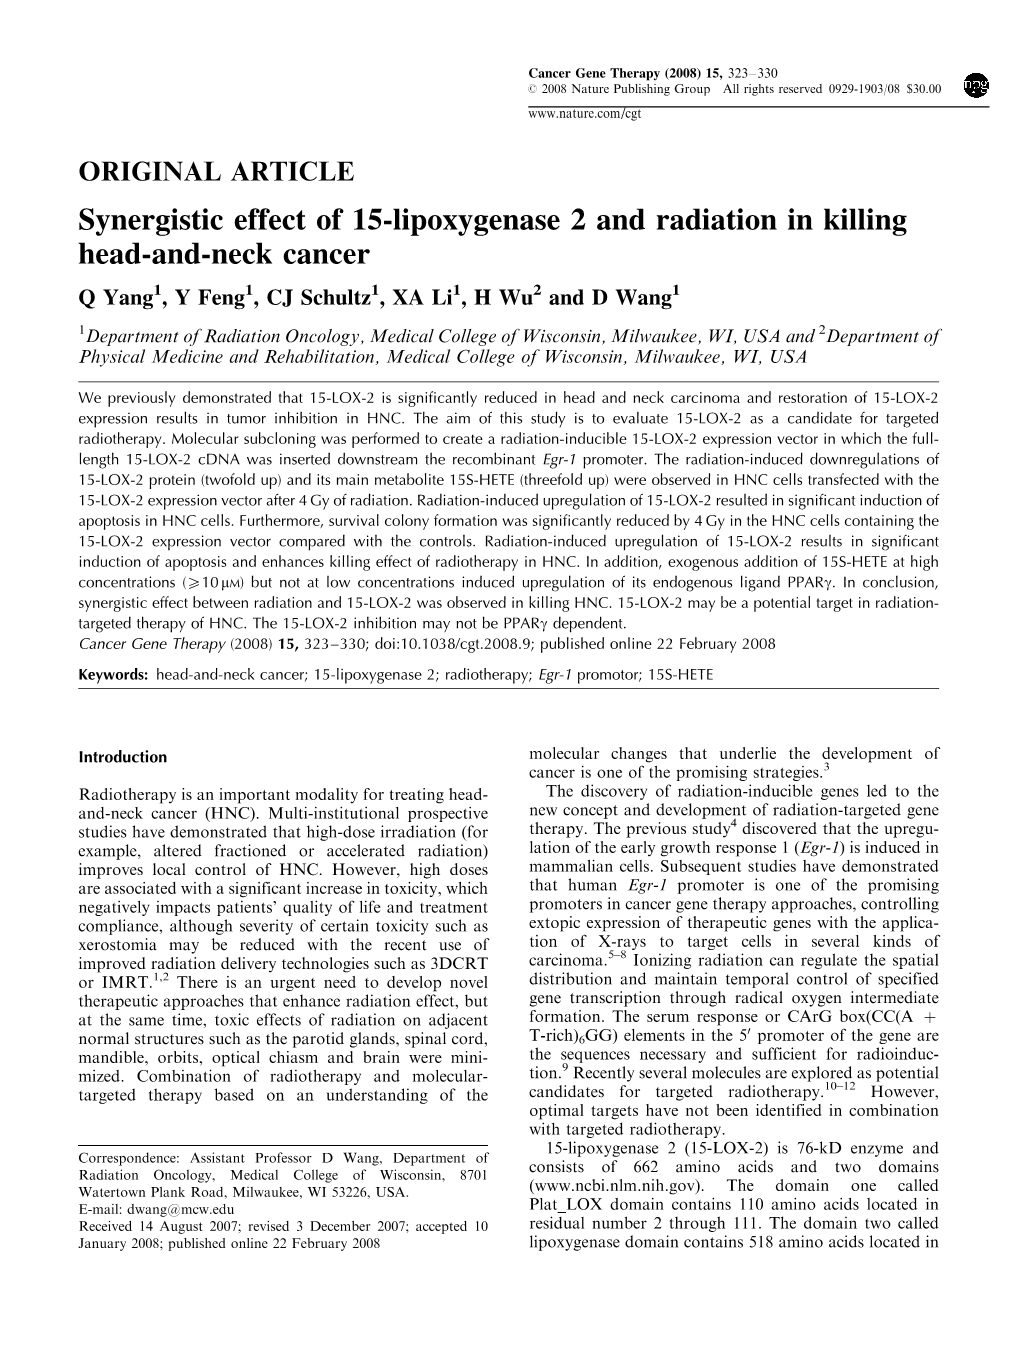 Synergistic Effect of 15-Lipoxygenase 2 and Radiation in Killing Head-And